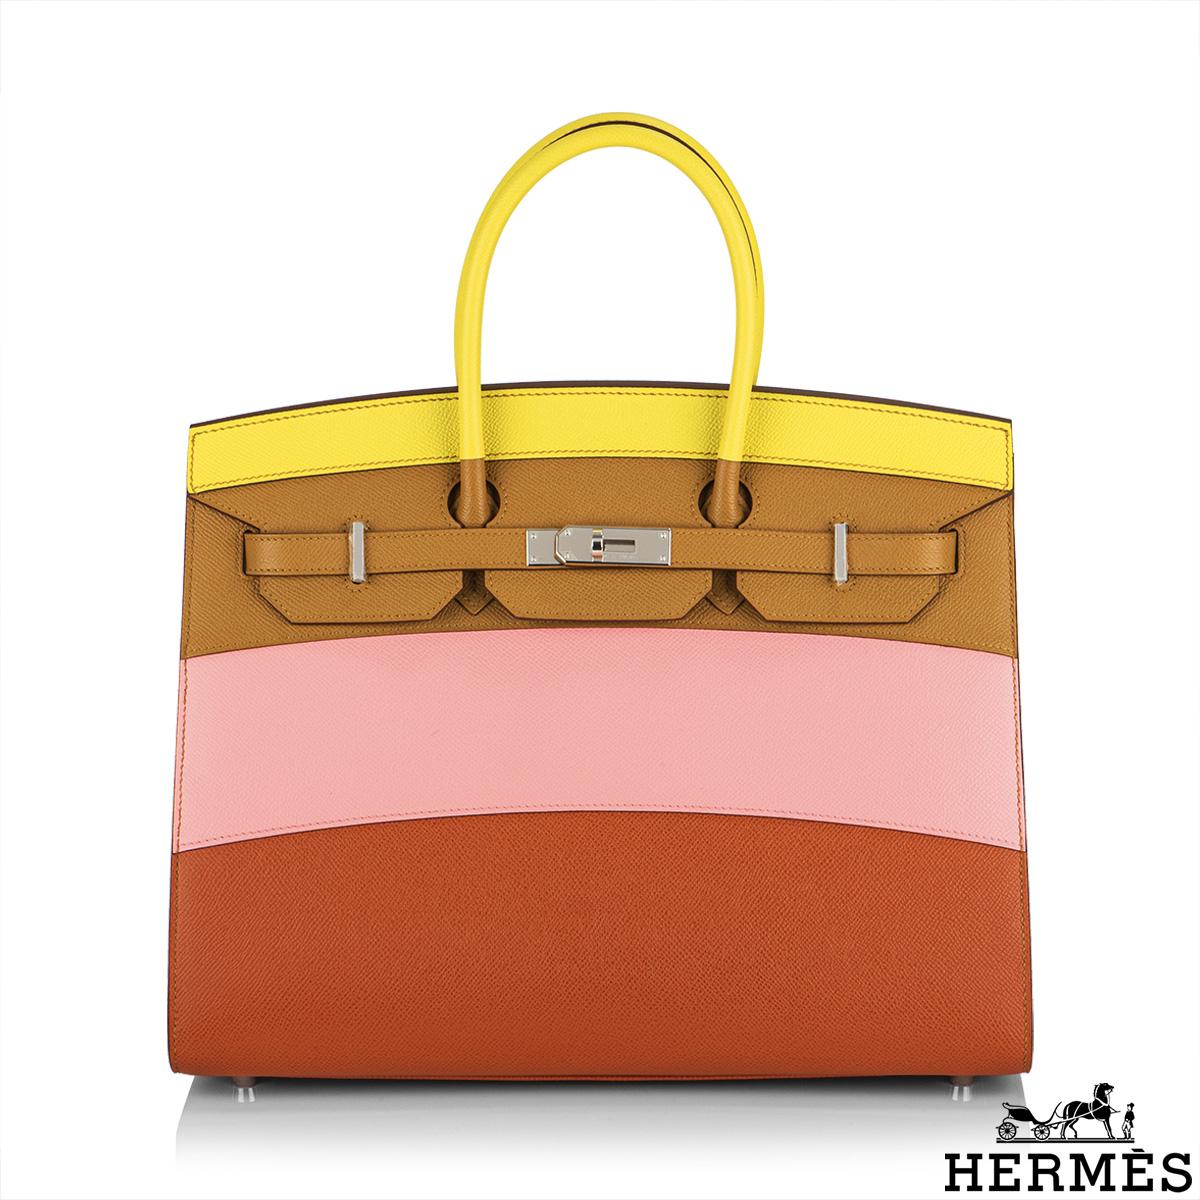 A Rare Limited Edition Hermès Sellier Birkin 35 Rainbow Sunrise bag. The exterior of this birkin features epsom leather in yellow lime, sésame beige, rose confetti, and brown terre. These sunrise-inspired colours are complimented with palladium